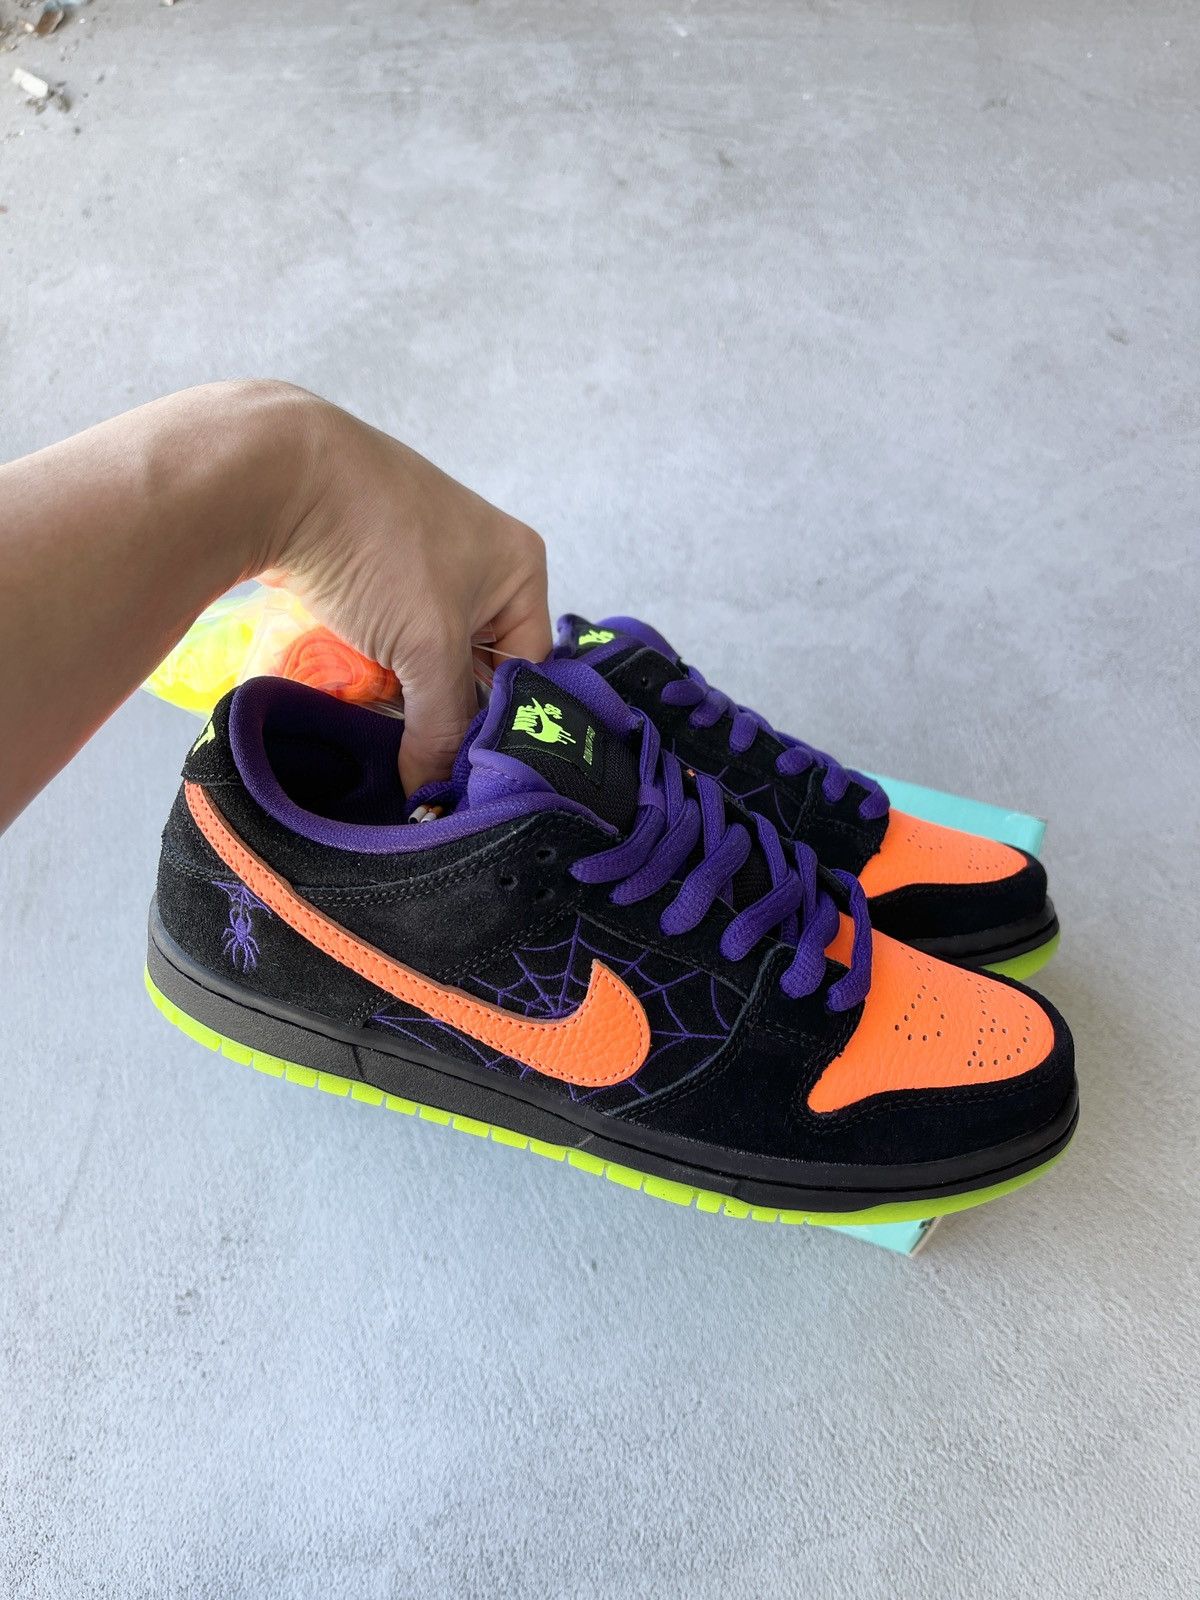 2019 Nike Dunk SB Low “Night of Mischeif” - Size 7 - 7